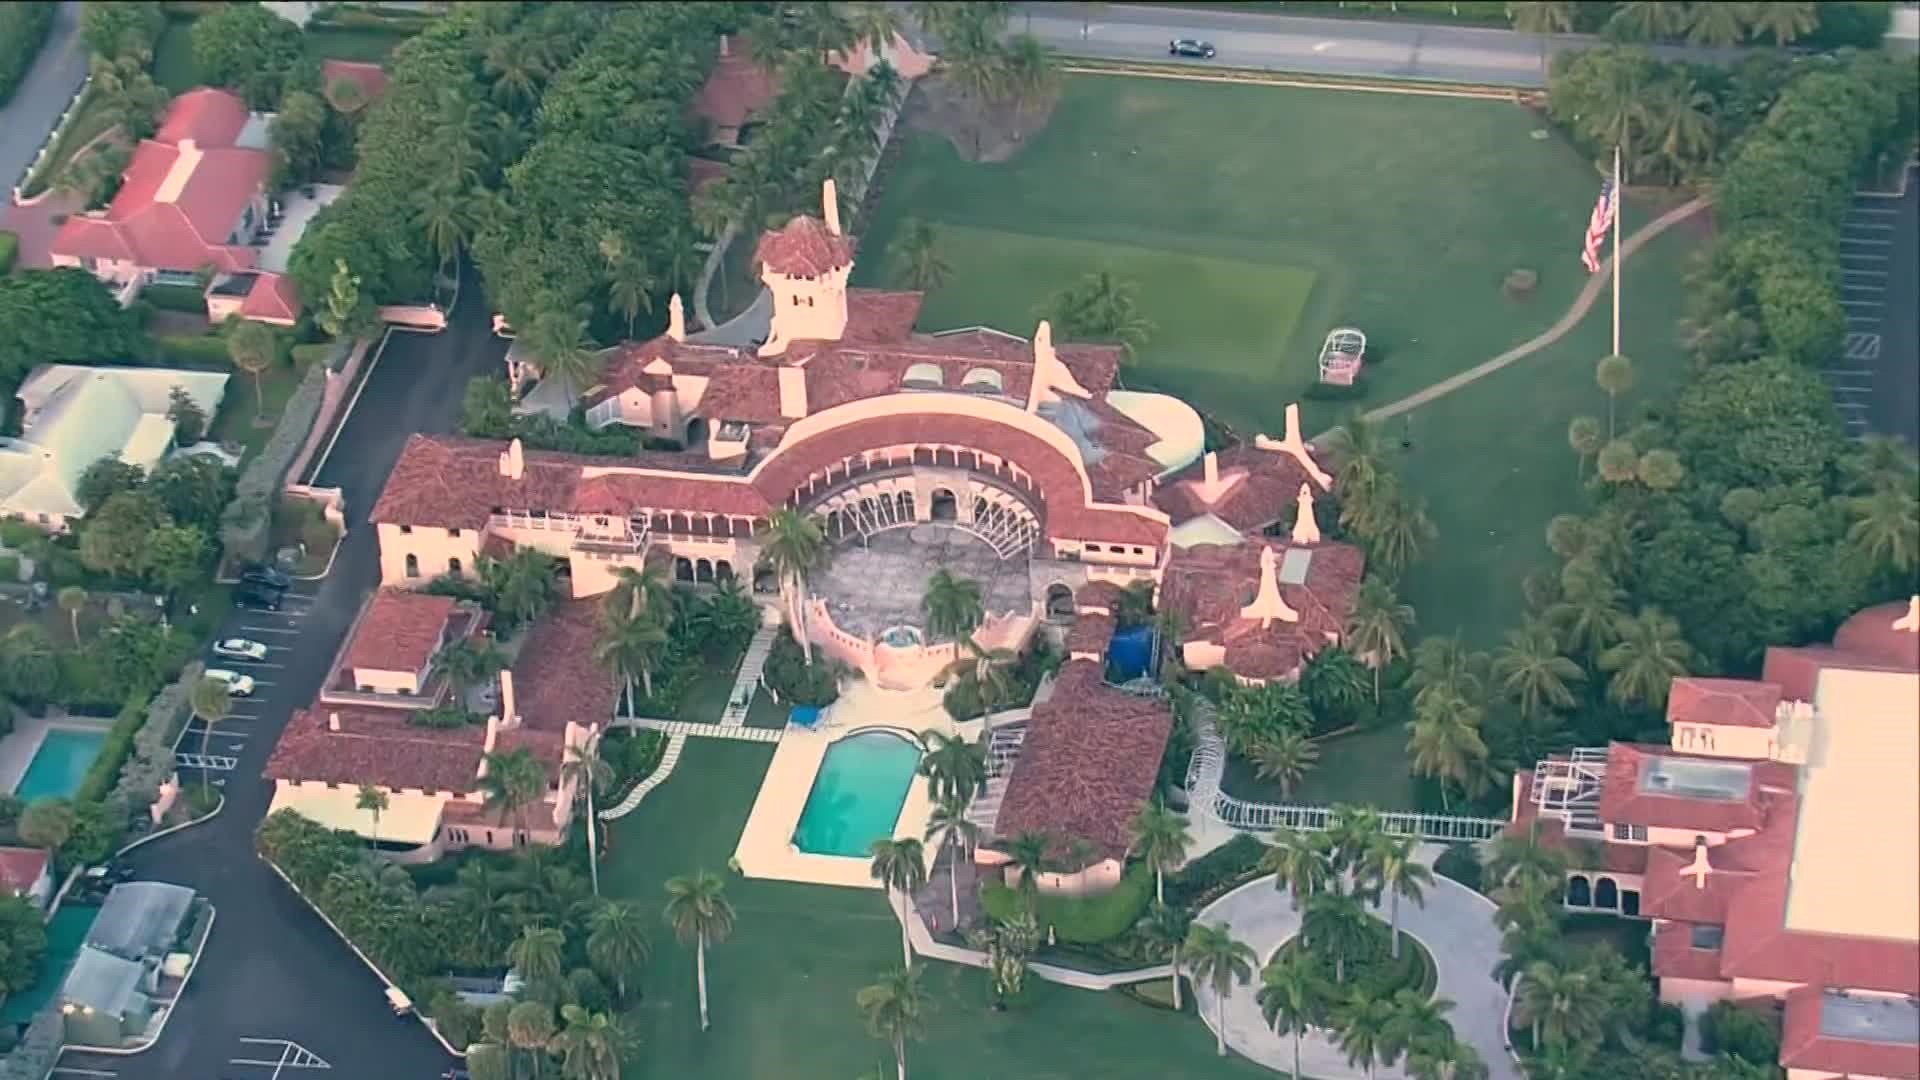 Ricky Shiffer posted about being ready for "combat" against agents after Mar-a-Lago search, investigators said after the incident in Cincinnati.